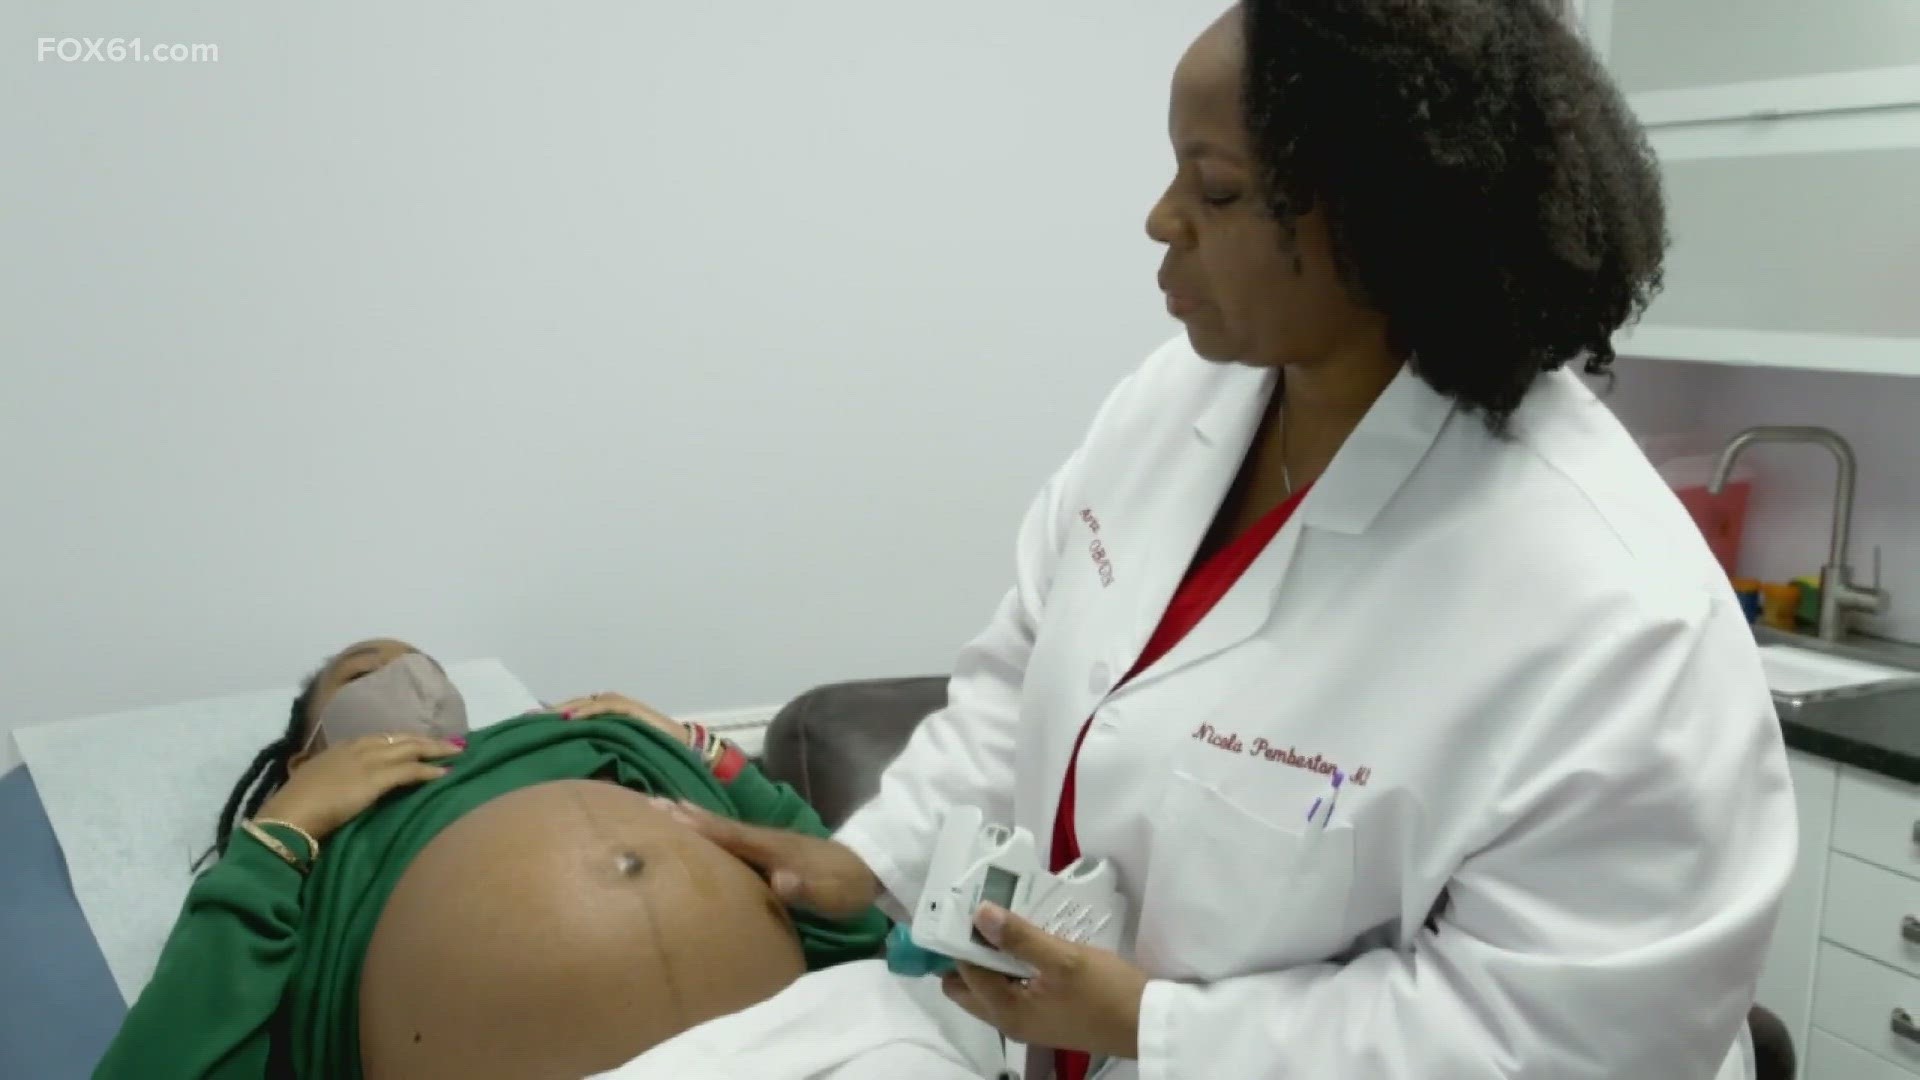 Sen. Richard Blumenthal is pushing for $1 billion to put towards resources to solve the Black maternal health crisis in Connecticut and the U.S.